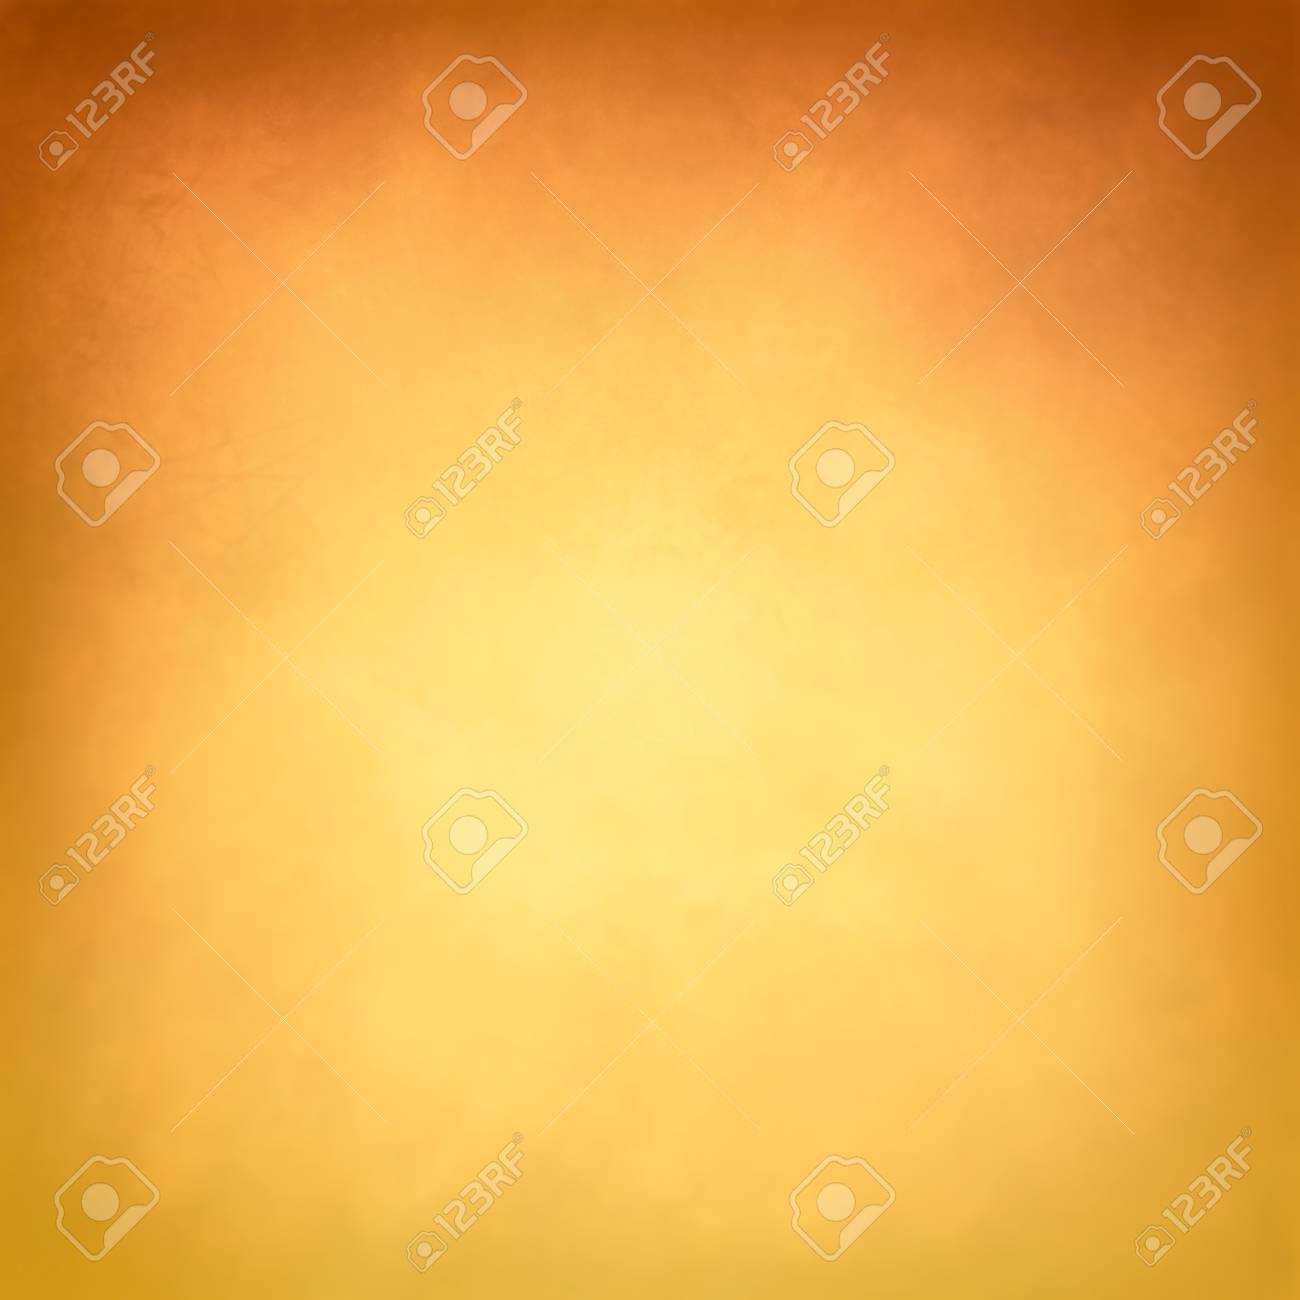 Gold Background With Orange And Brown Hues In Tuscan Style